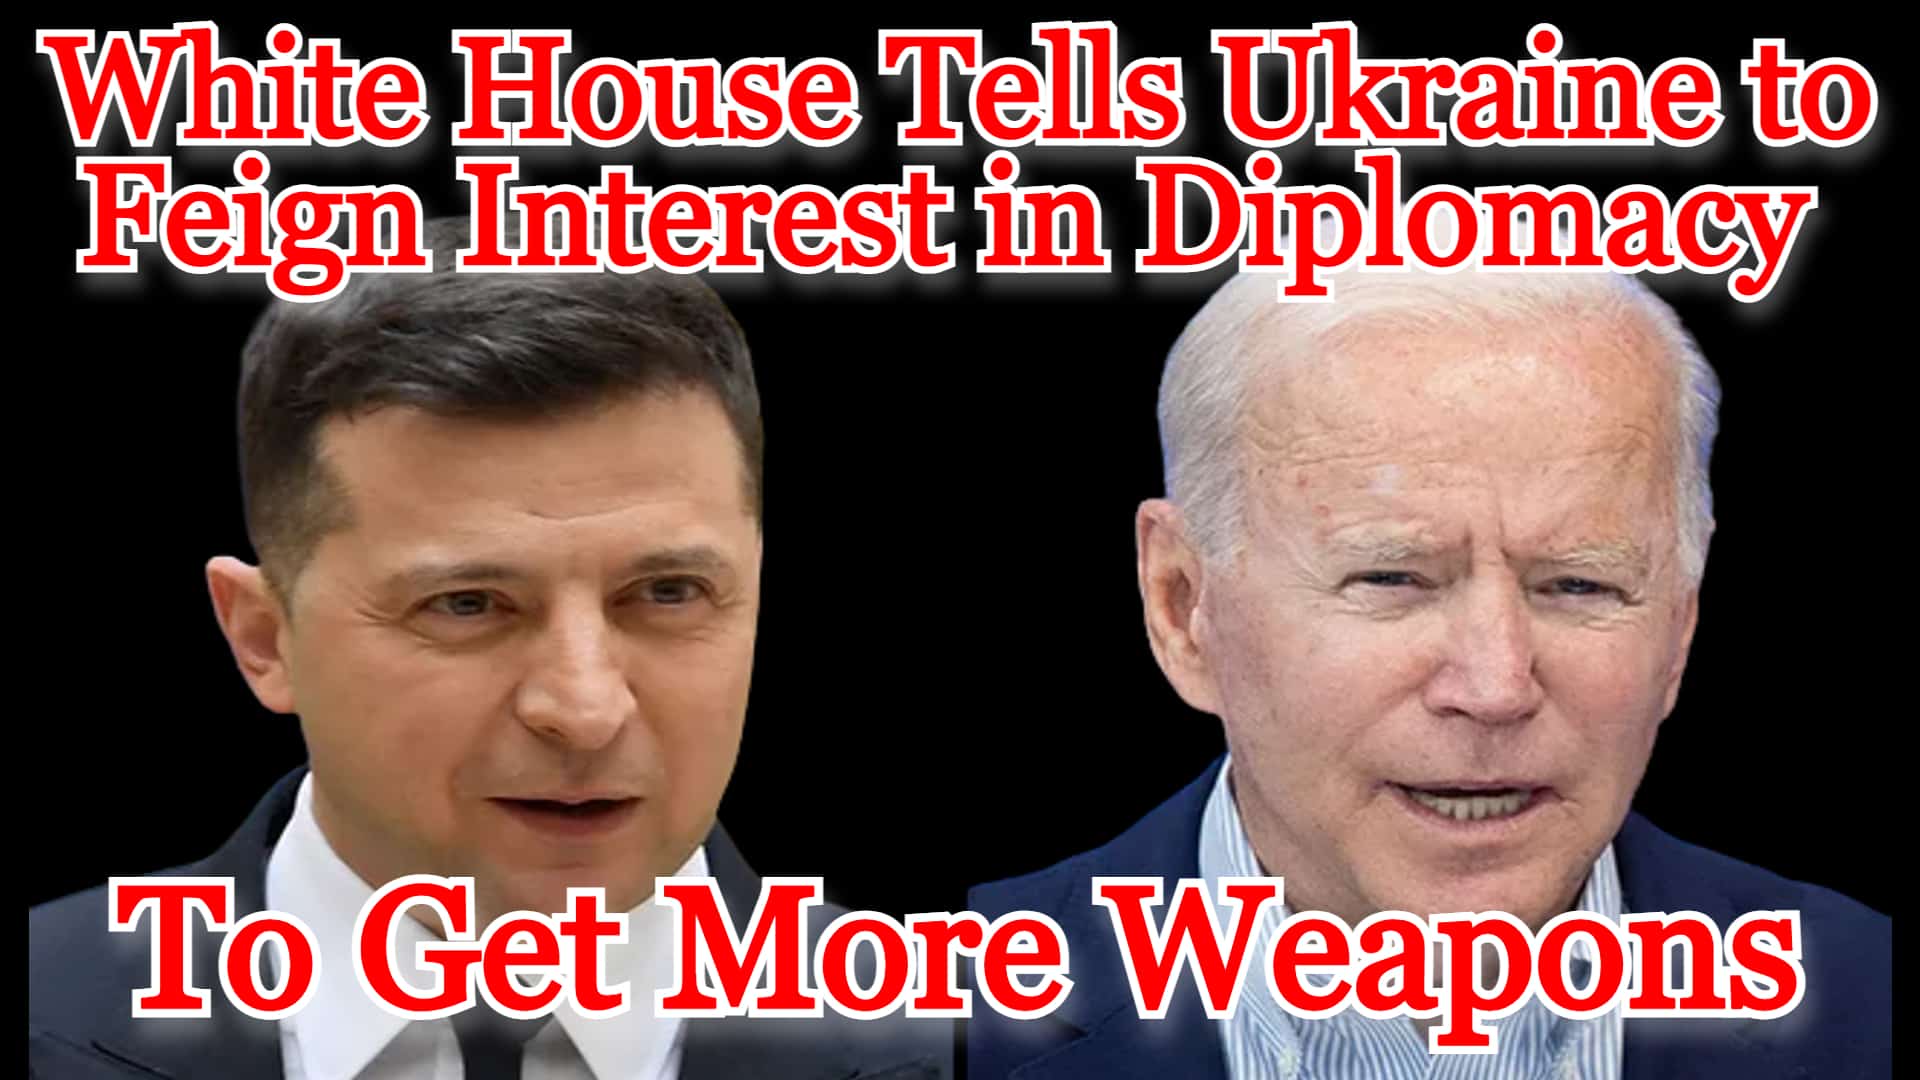 COI #347: White House Tells Ukraine to Feign Interest in Diplomacy to Get More Weapons